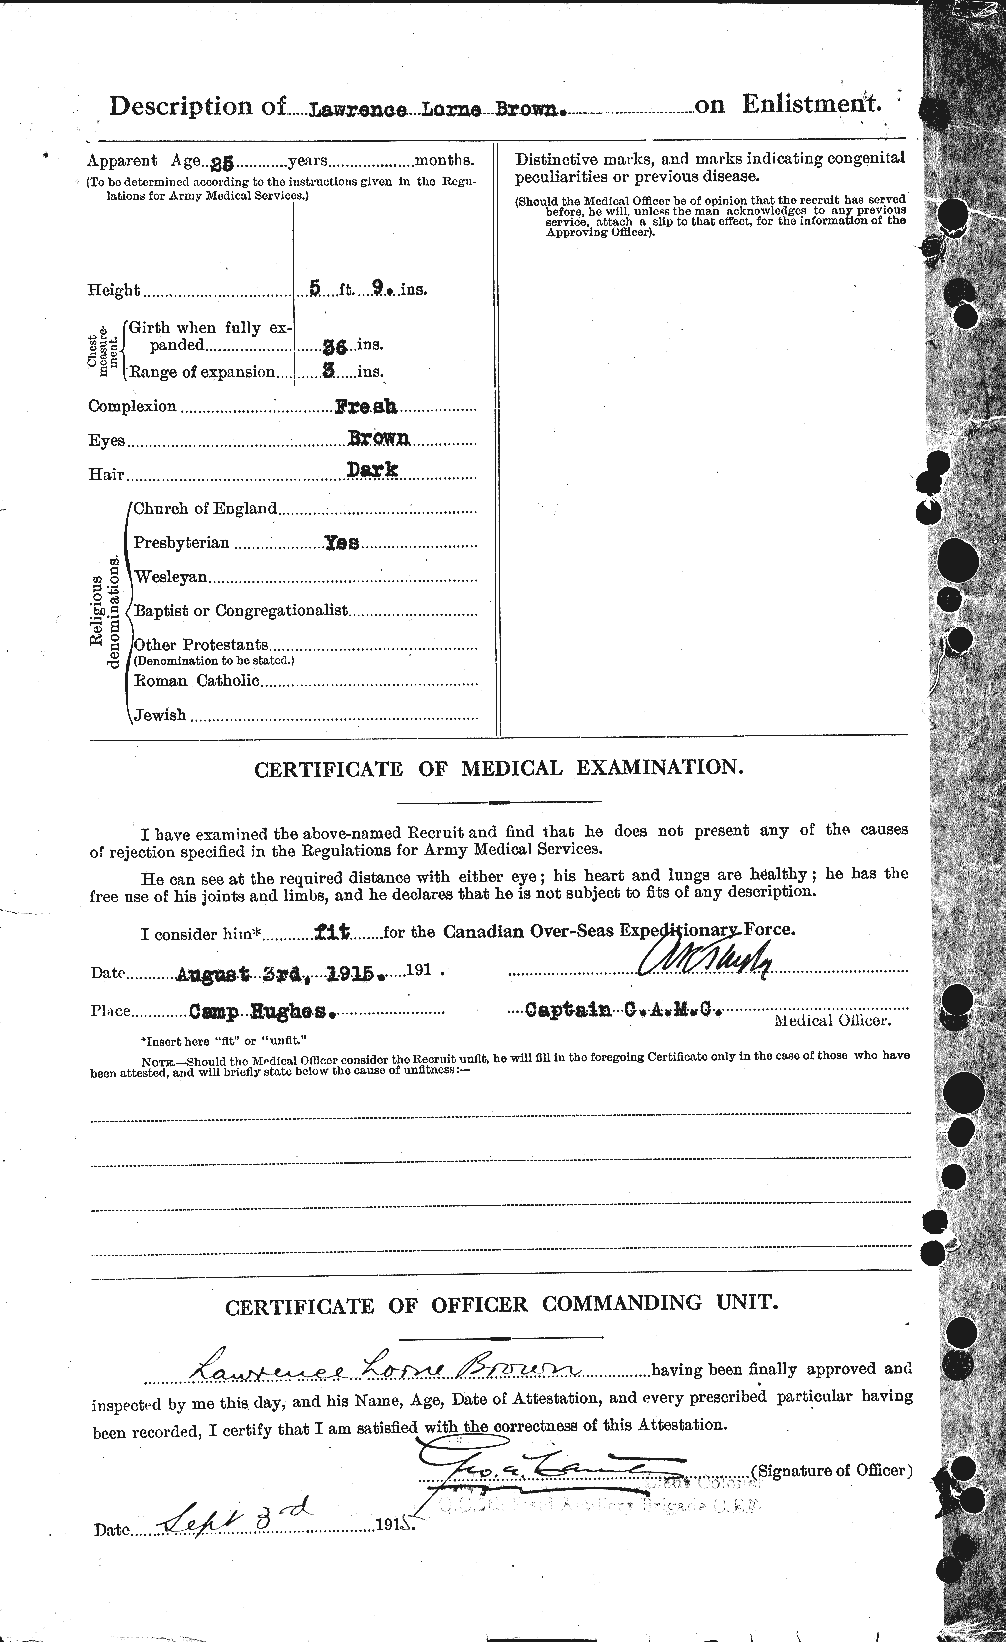 Personnel Records of the First World War - CEF 266270b